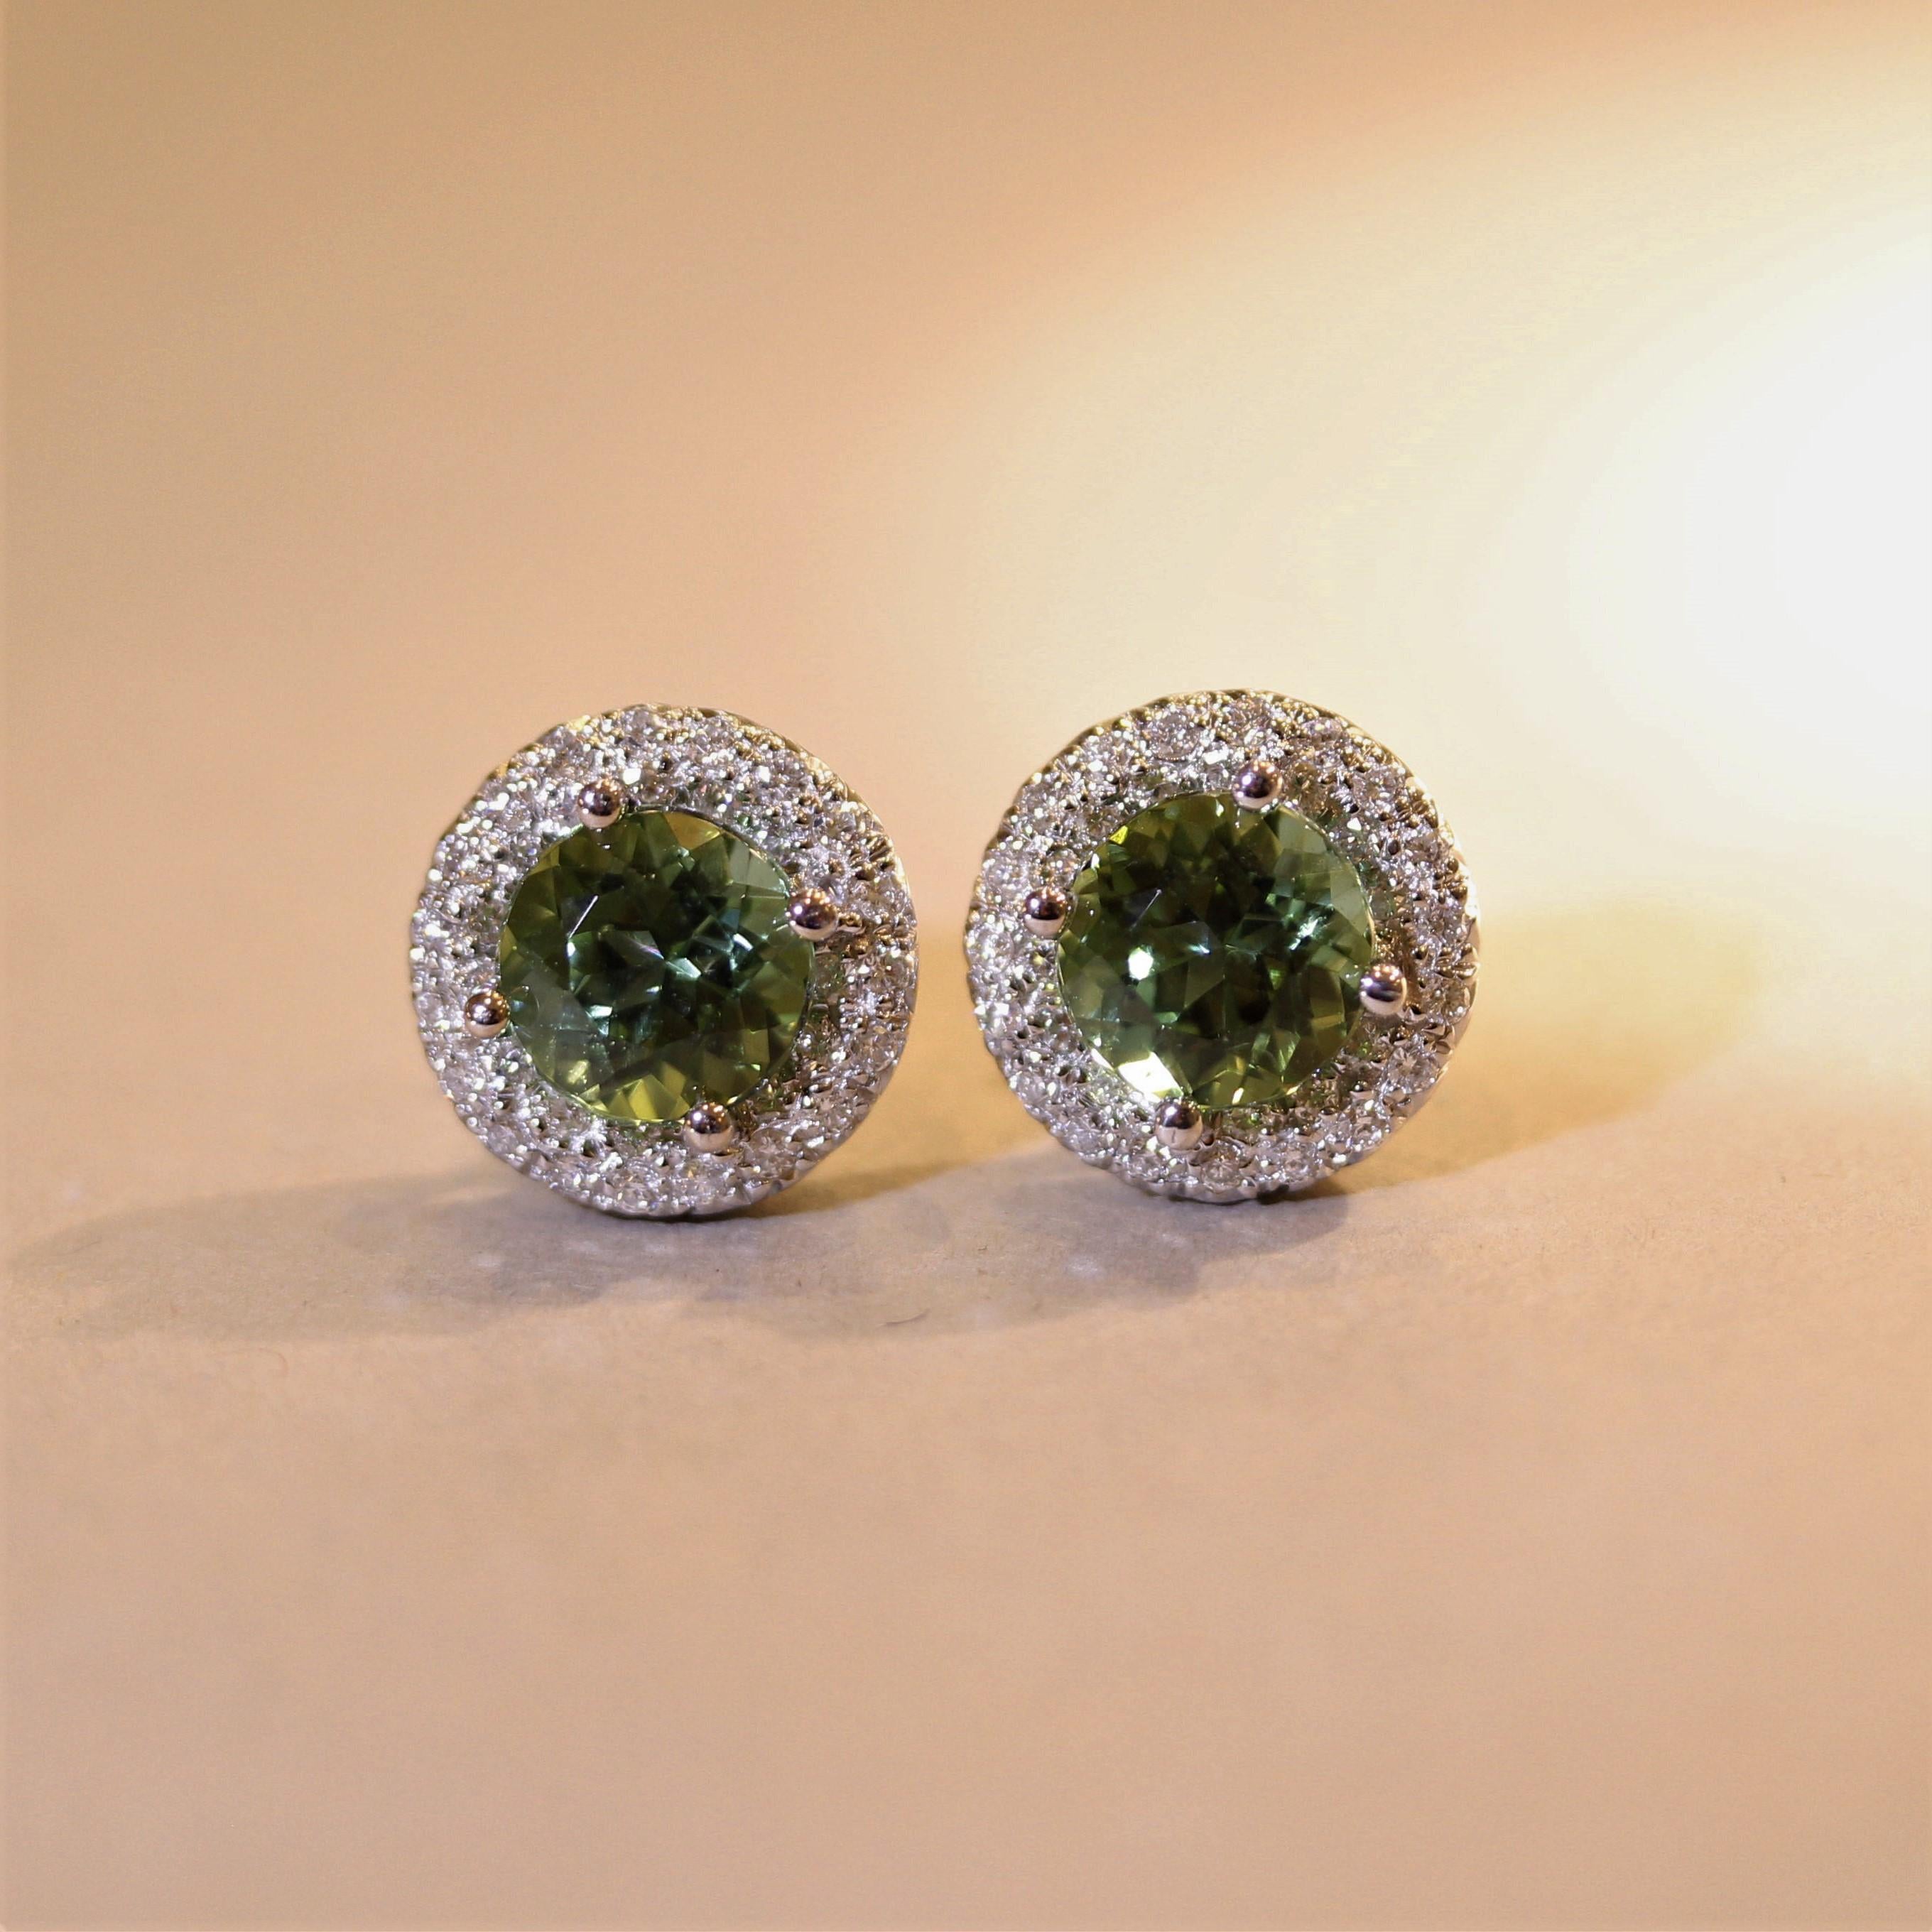 A simple yet extra fine pair of stud earrings! They feature gem lime-green colored tourmalines which weigh a total of 4.12 carats. Their color and brilliance are extra fine. It is accented by halos of round brilliant-cut diamonds which total 0.75